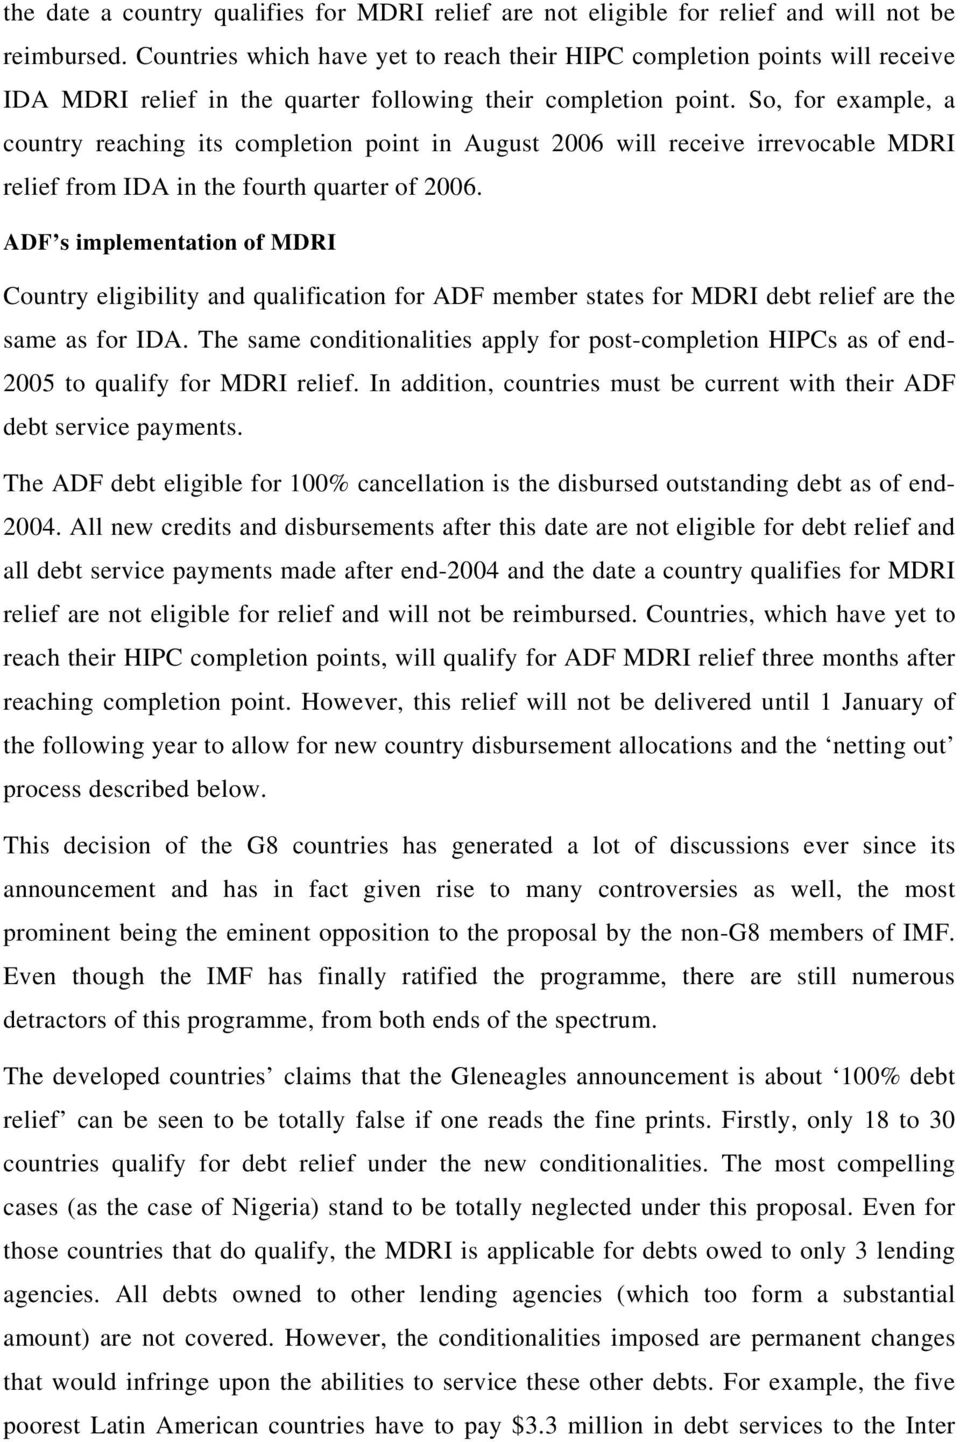 So, for example, a country reaching its completion point in August 2006 will receive irrevocable MDRI relief from IDA in the fourth quarter of 2006.